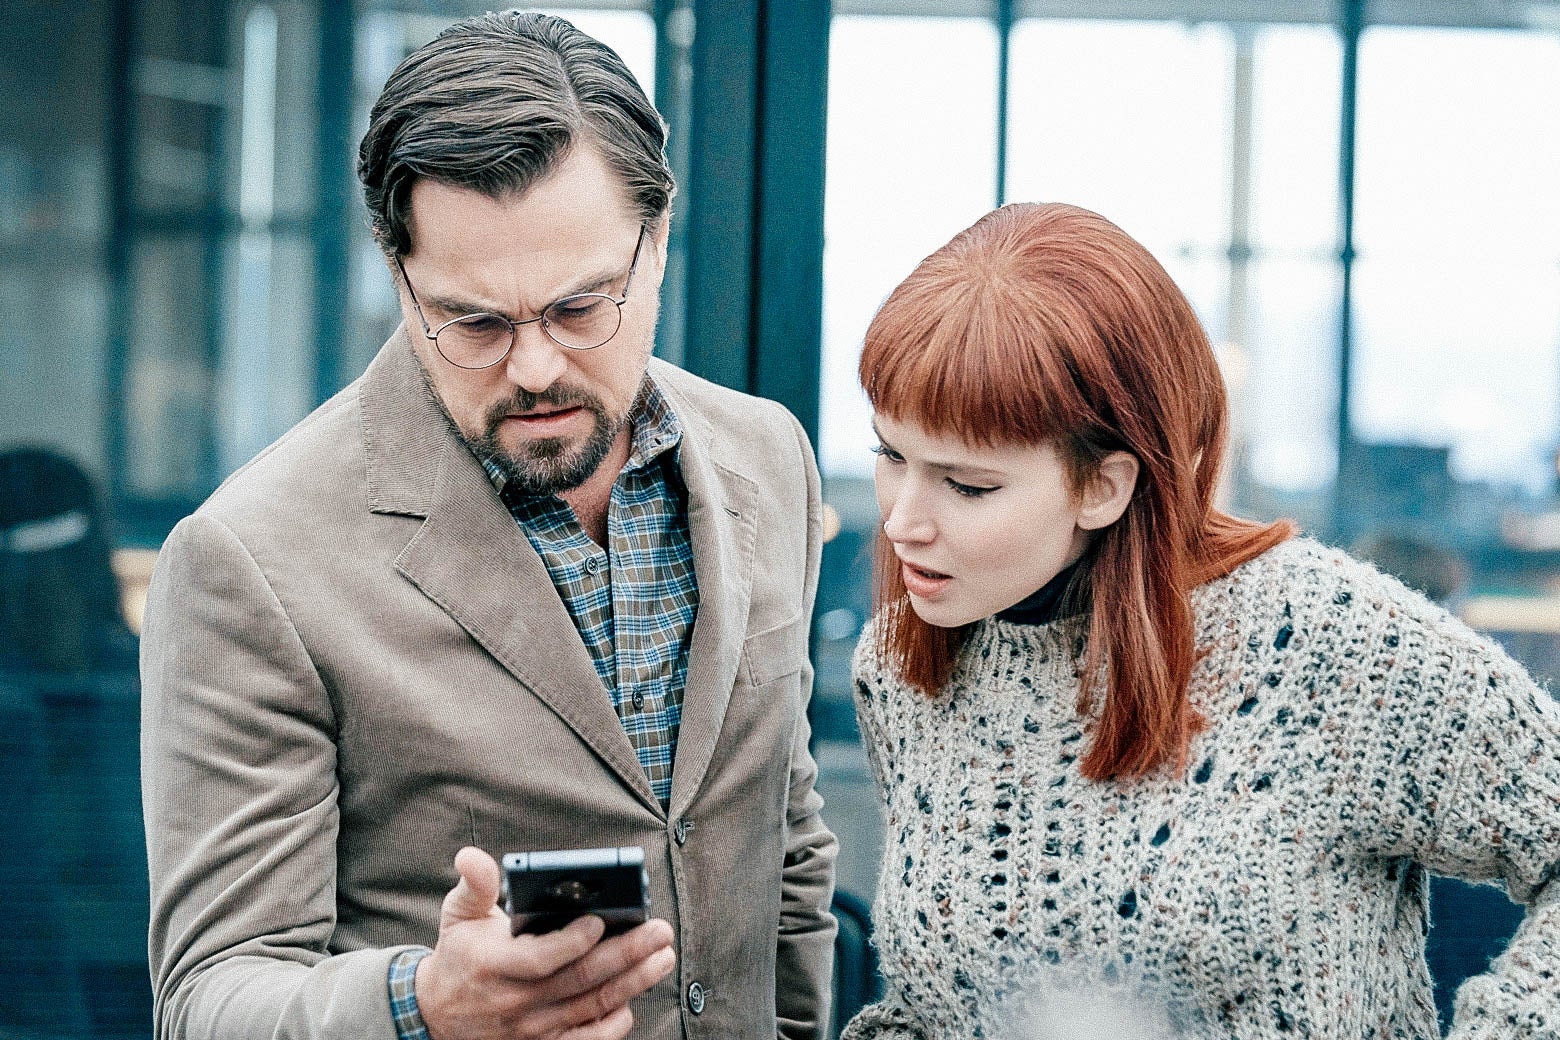 Leonardo DiCaprio and Jennifer Lawrence's characters look down at a smartphone in DiCaprio's hand.